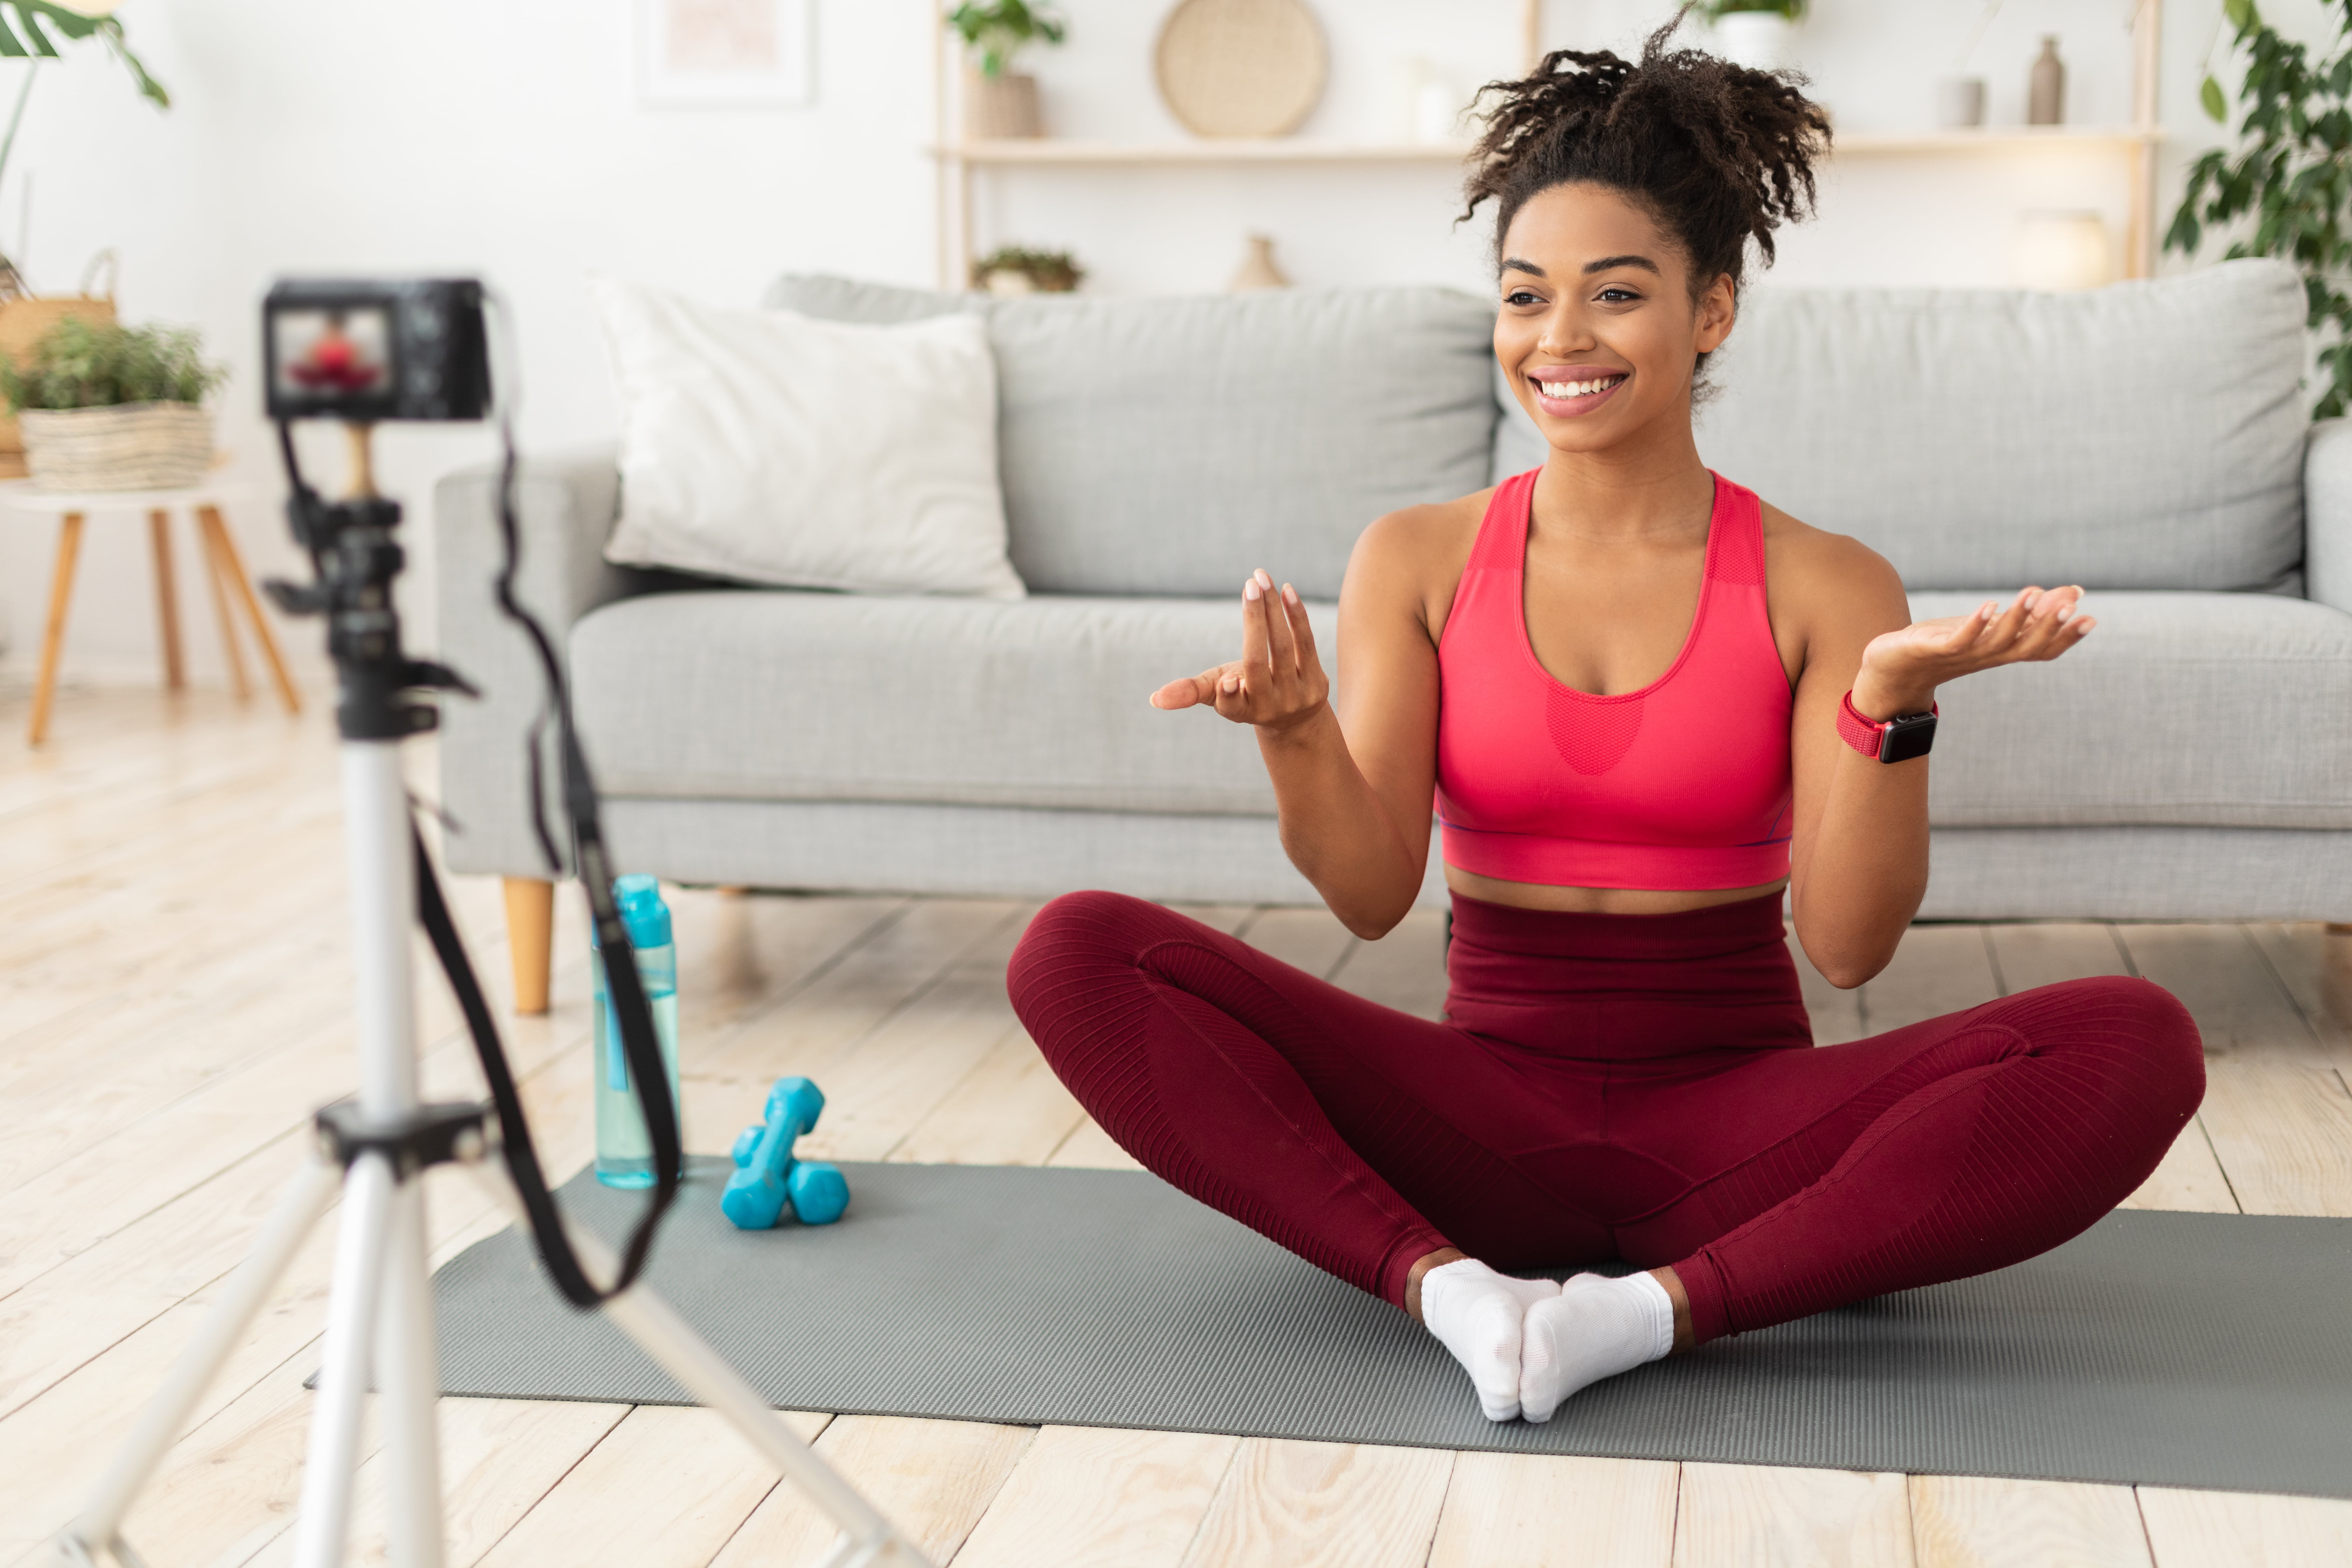 How to Establish Credibility and Trust as a New Online Fitness Trainer